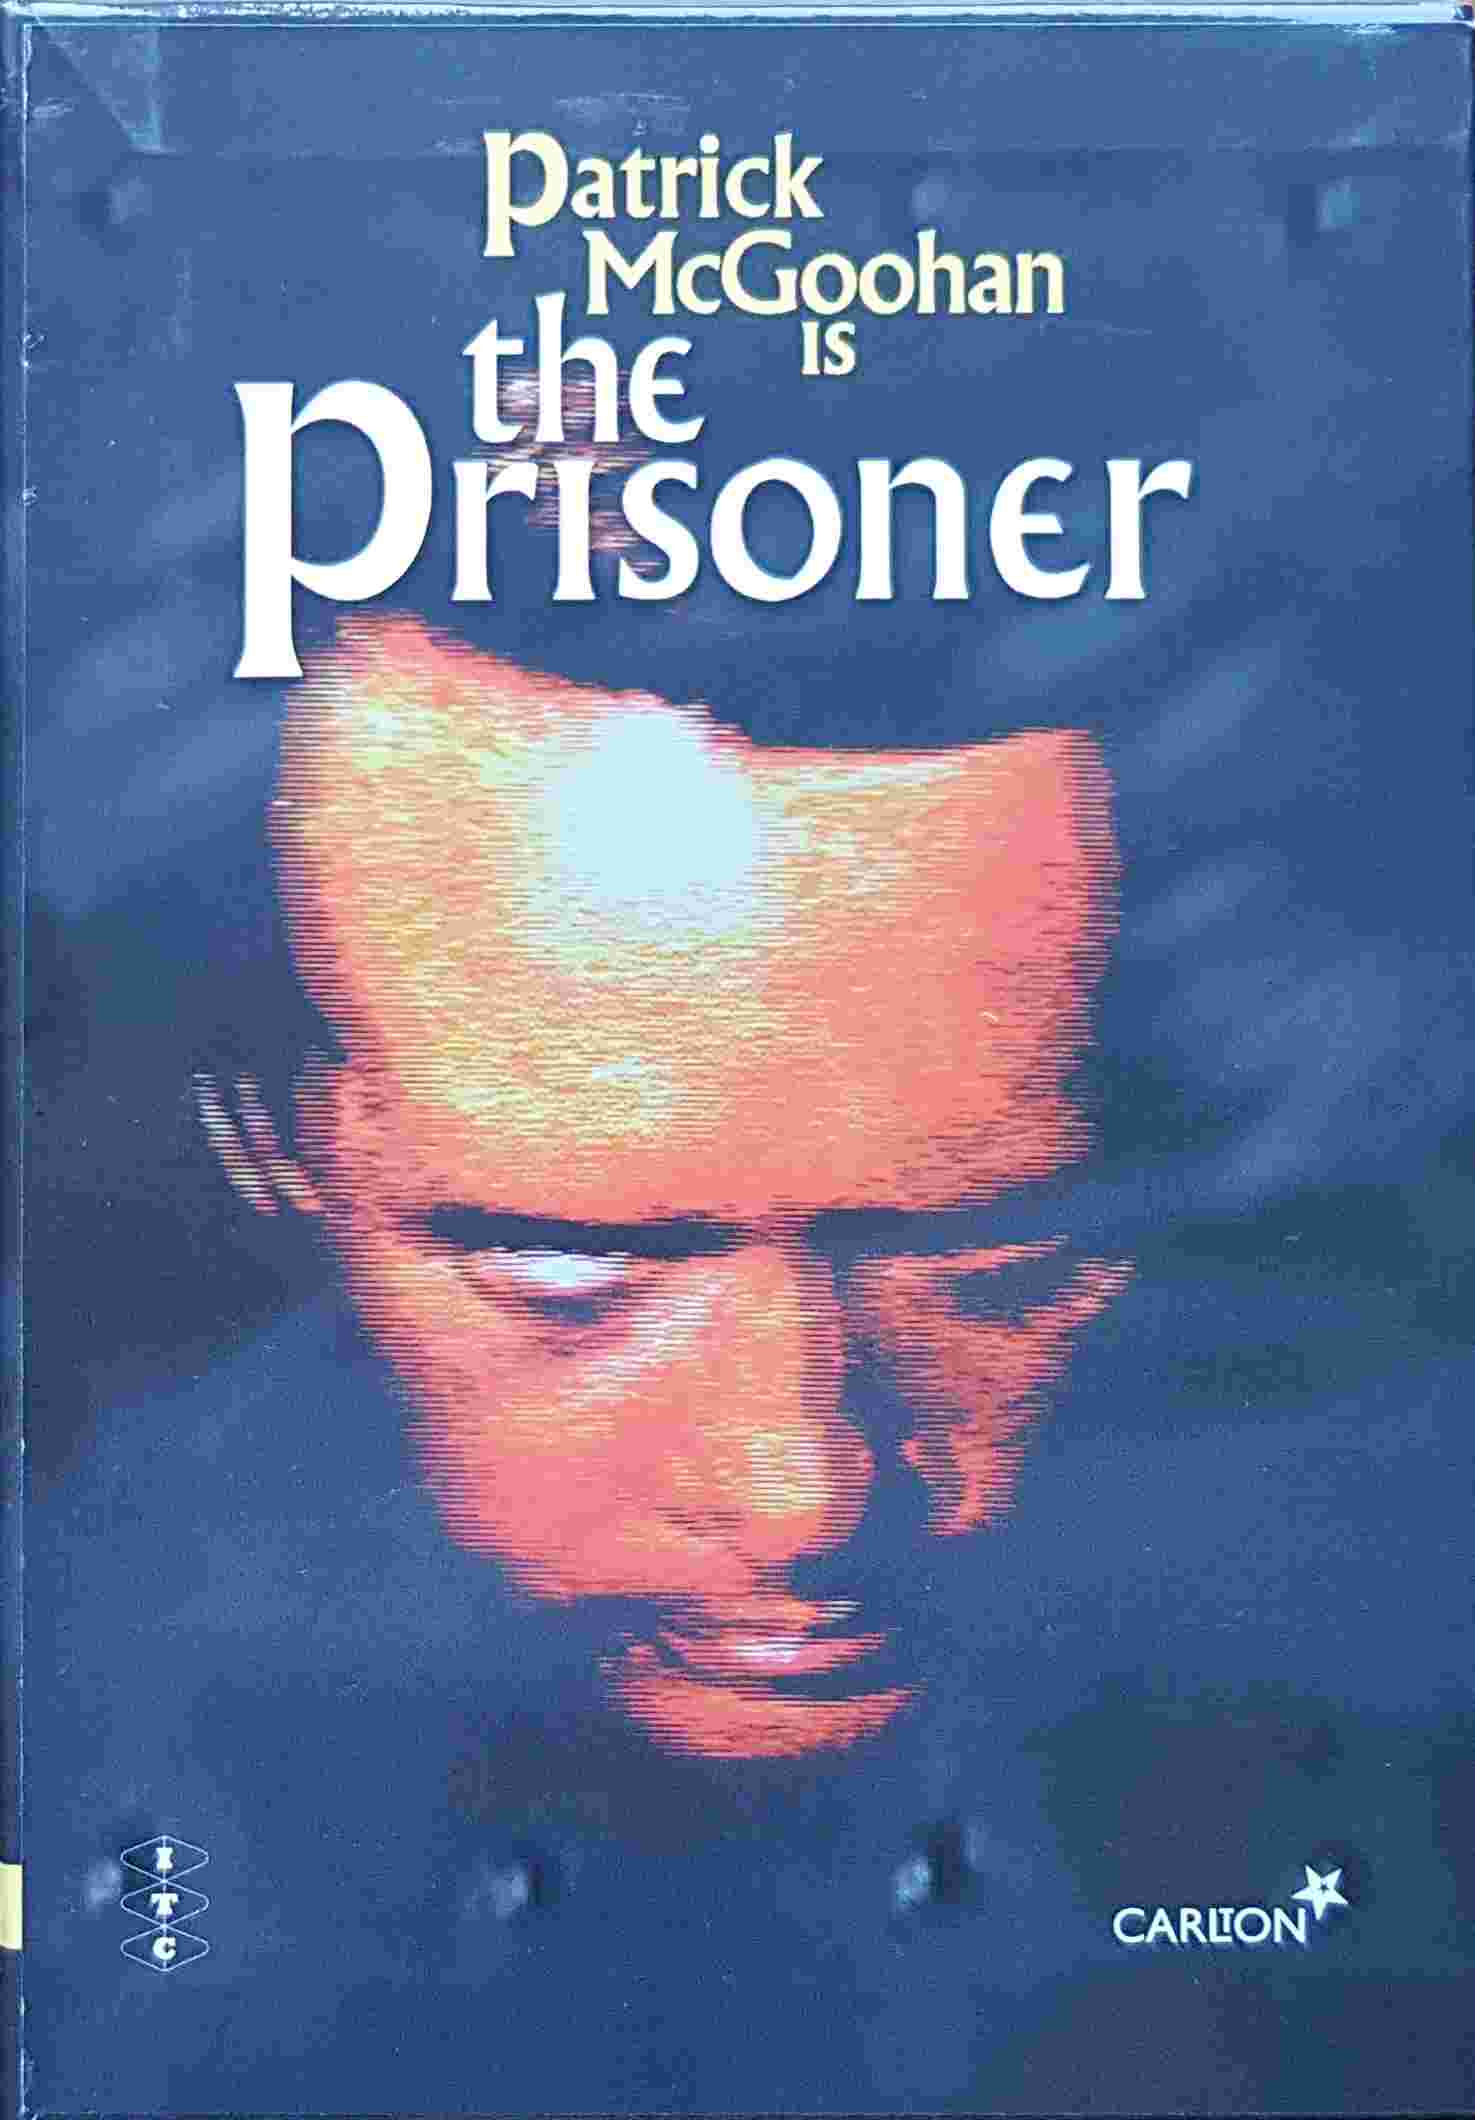 Picture of The prisoner by artist Various from ITV, Channel 4 and Channel 5 dvds library